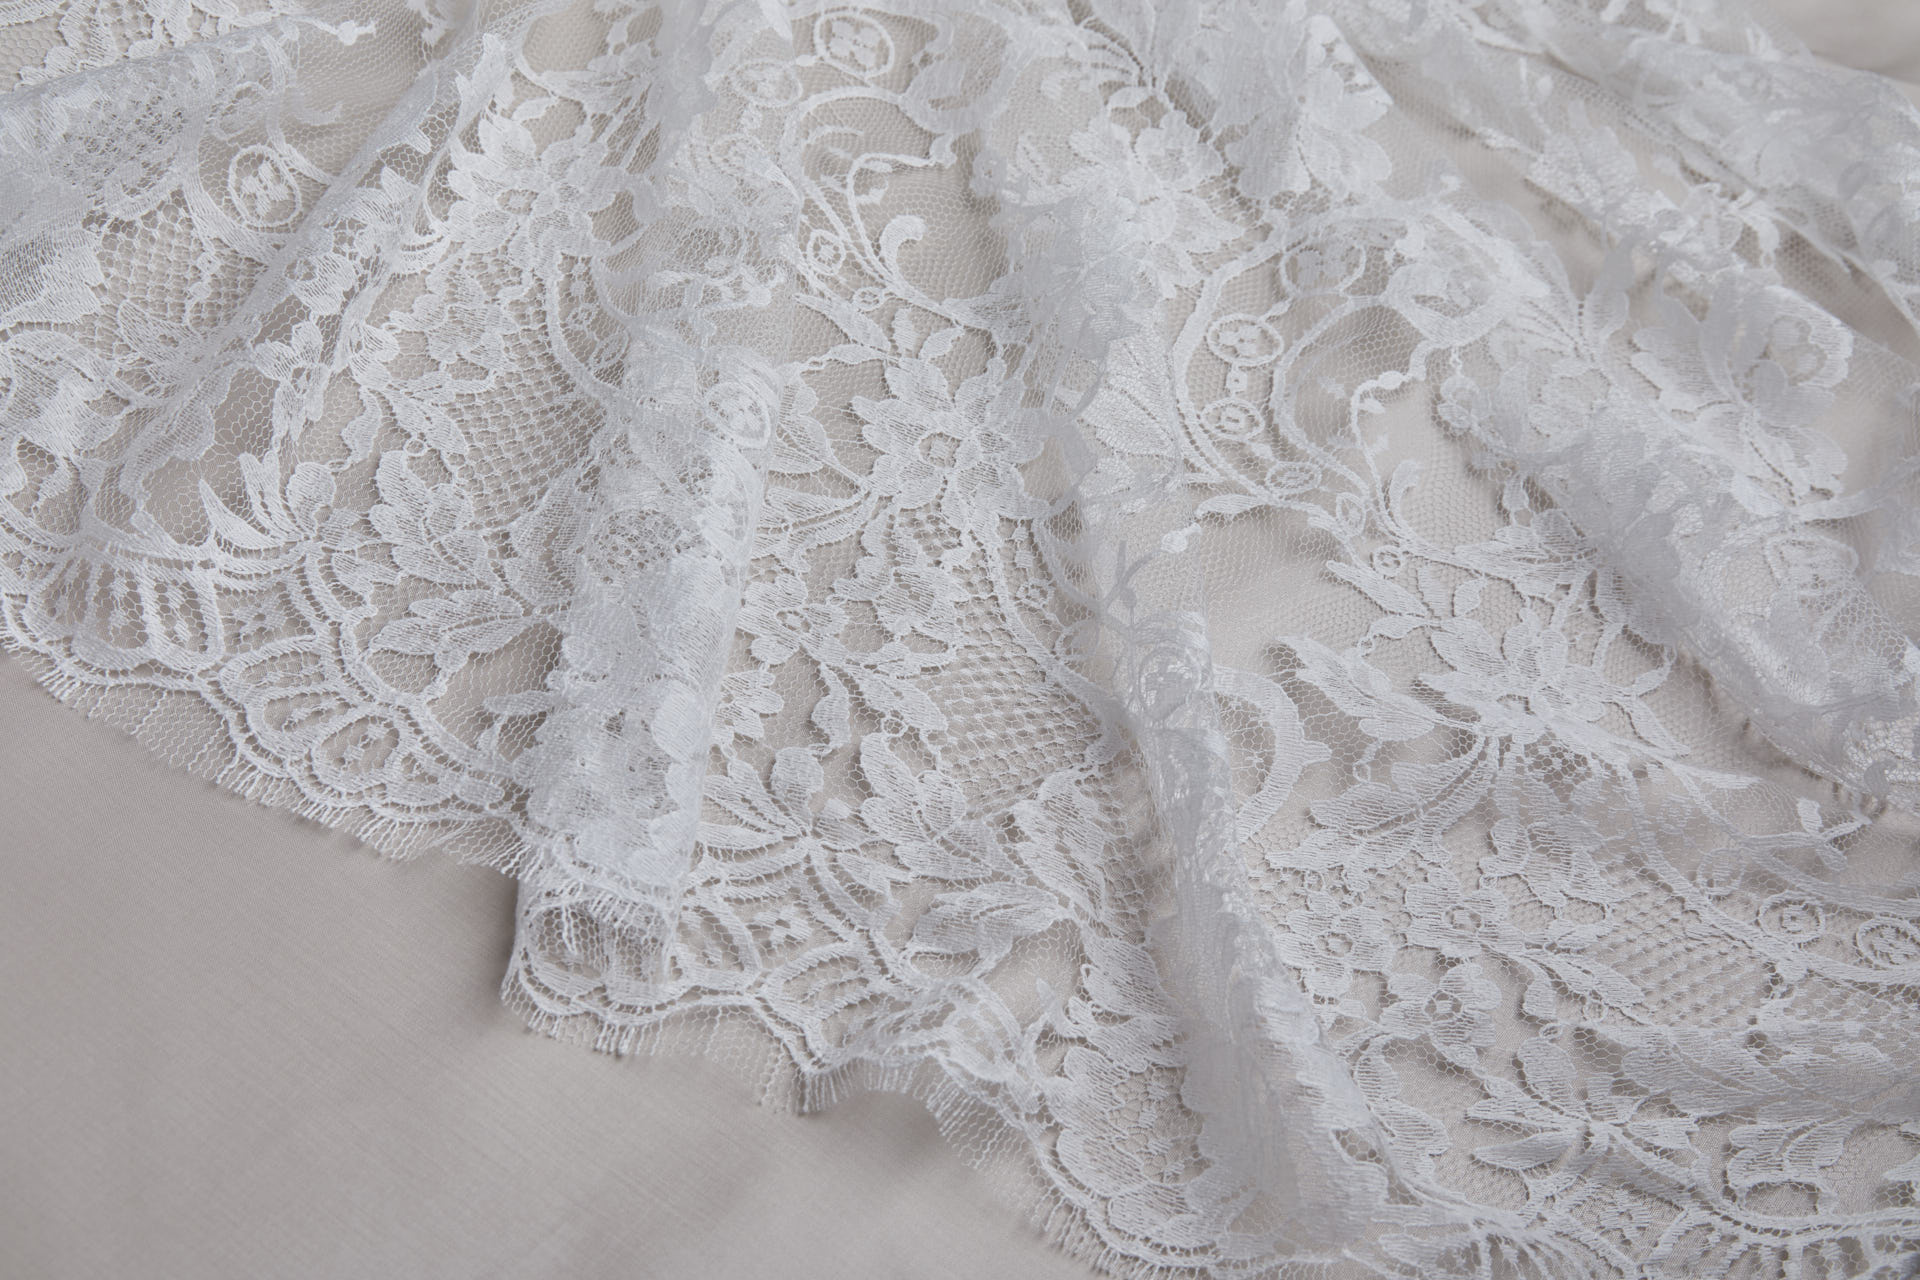 Leavers Lace fabric for a beautifully delicate wedding dress